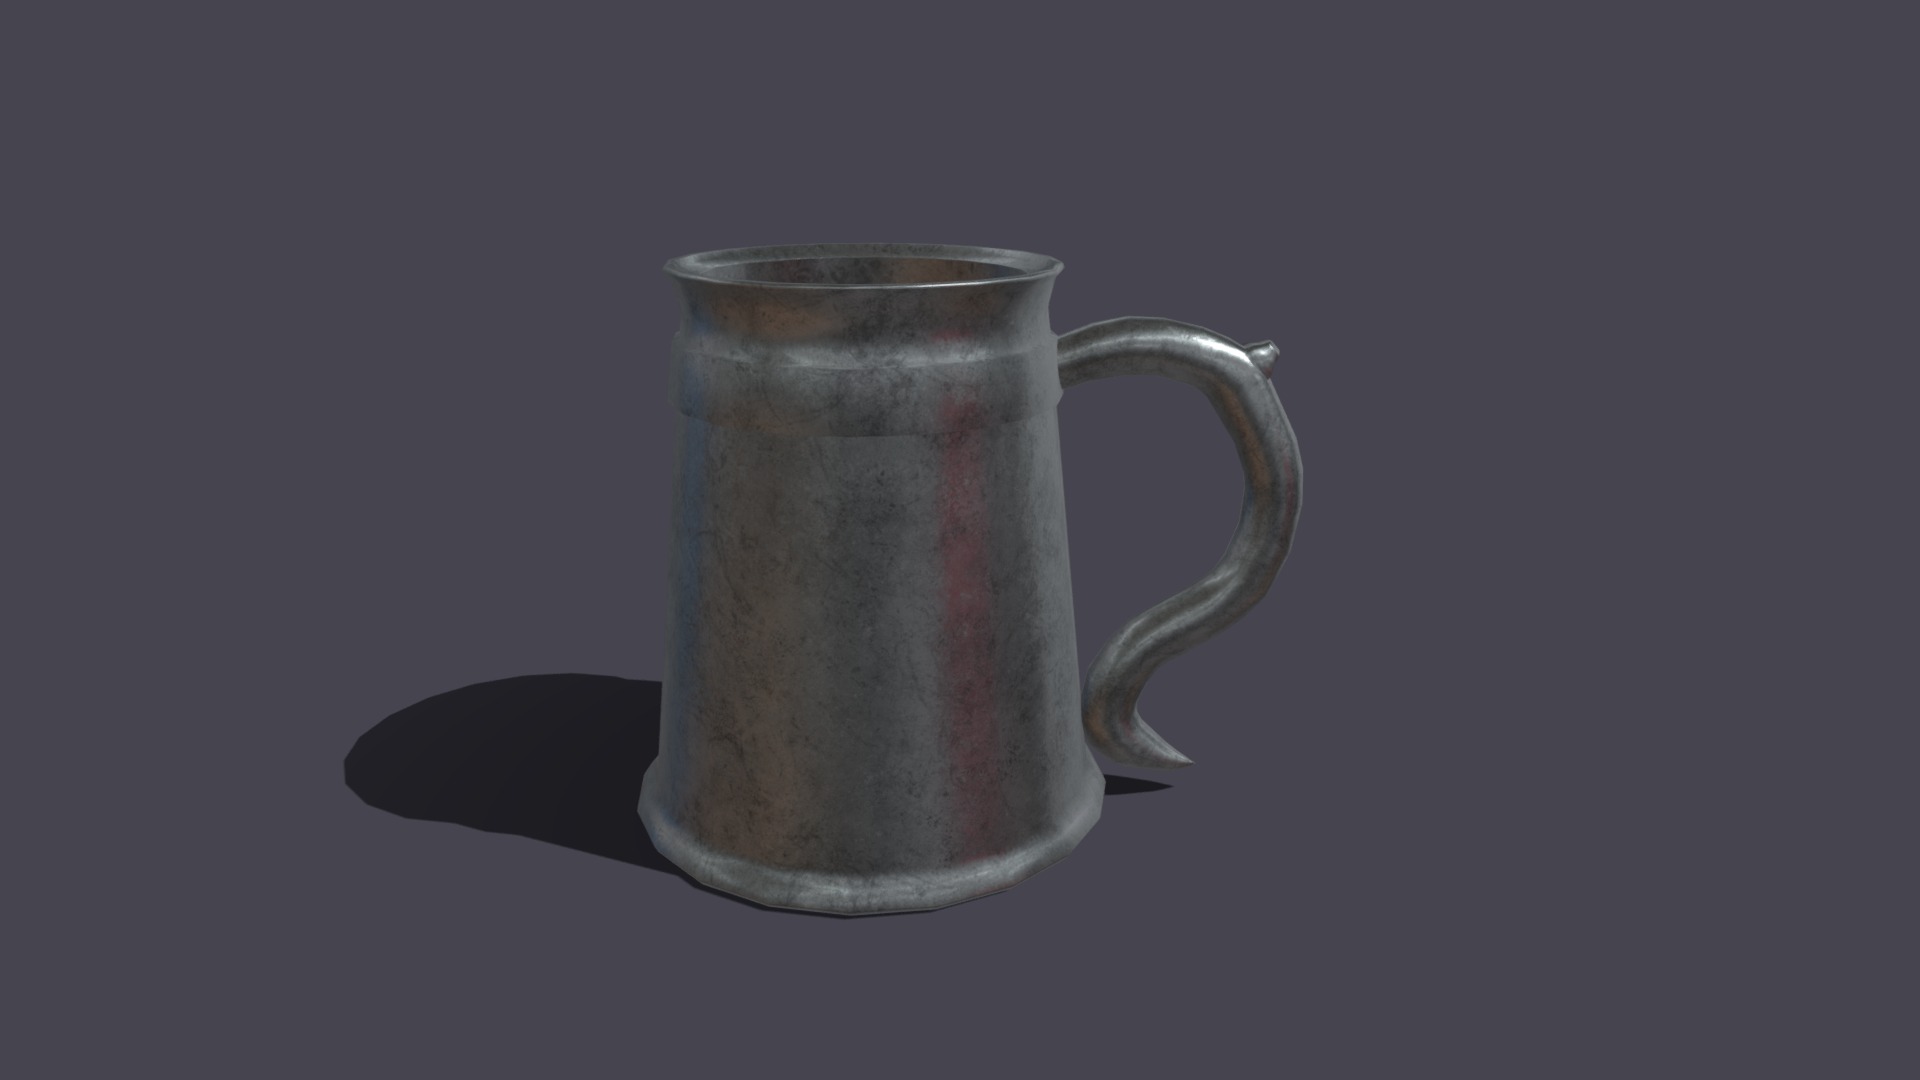 3D model Tavern Beer Cup - This is a 3D model of the Tavern Beer Cup. The 3D model is about a silver and brown coffee mug.